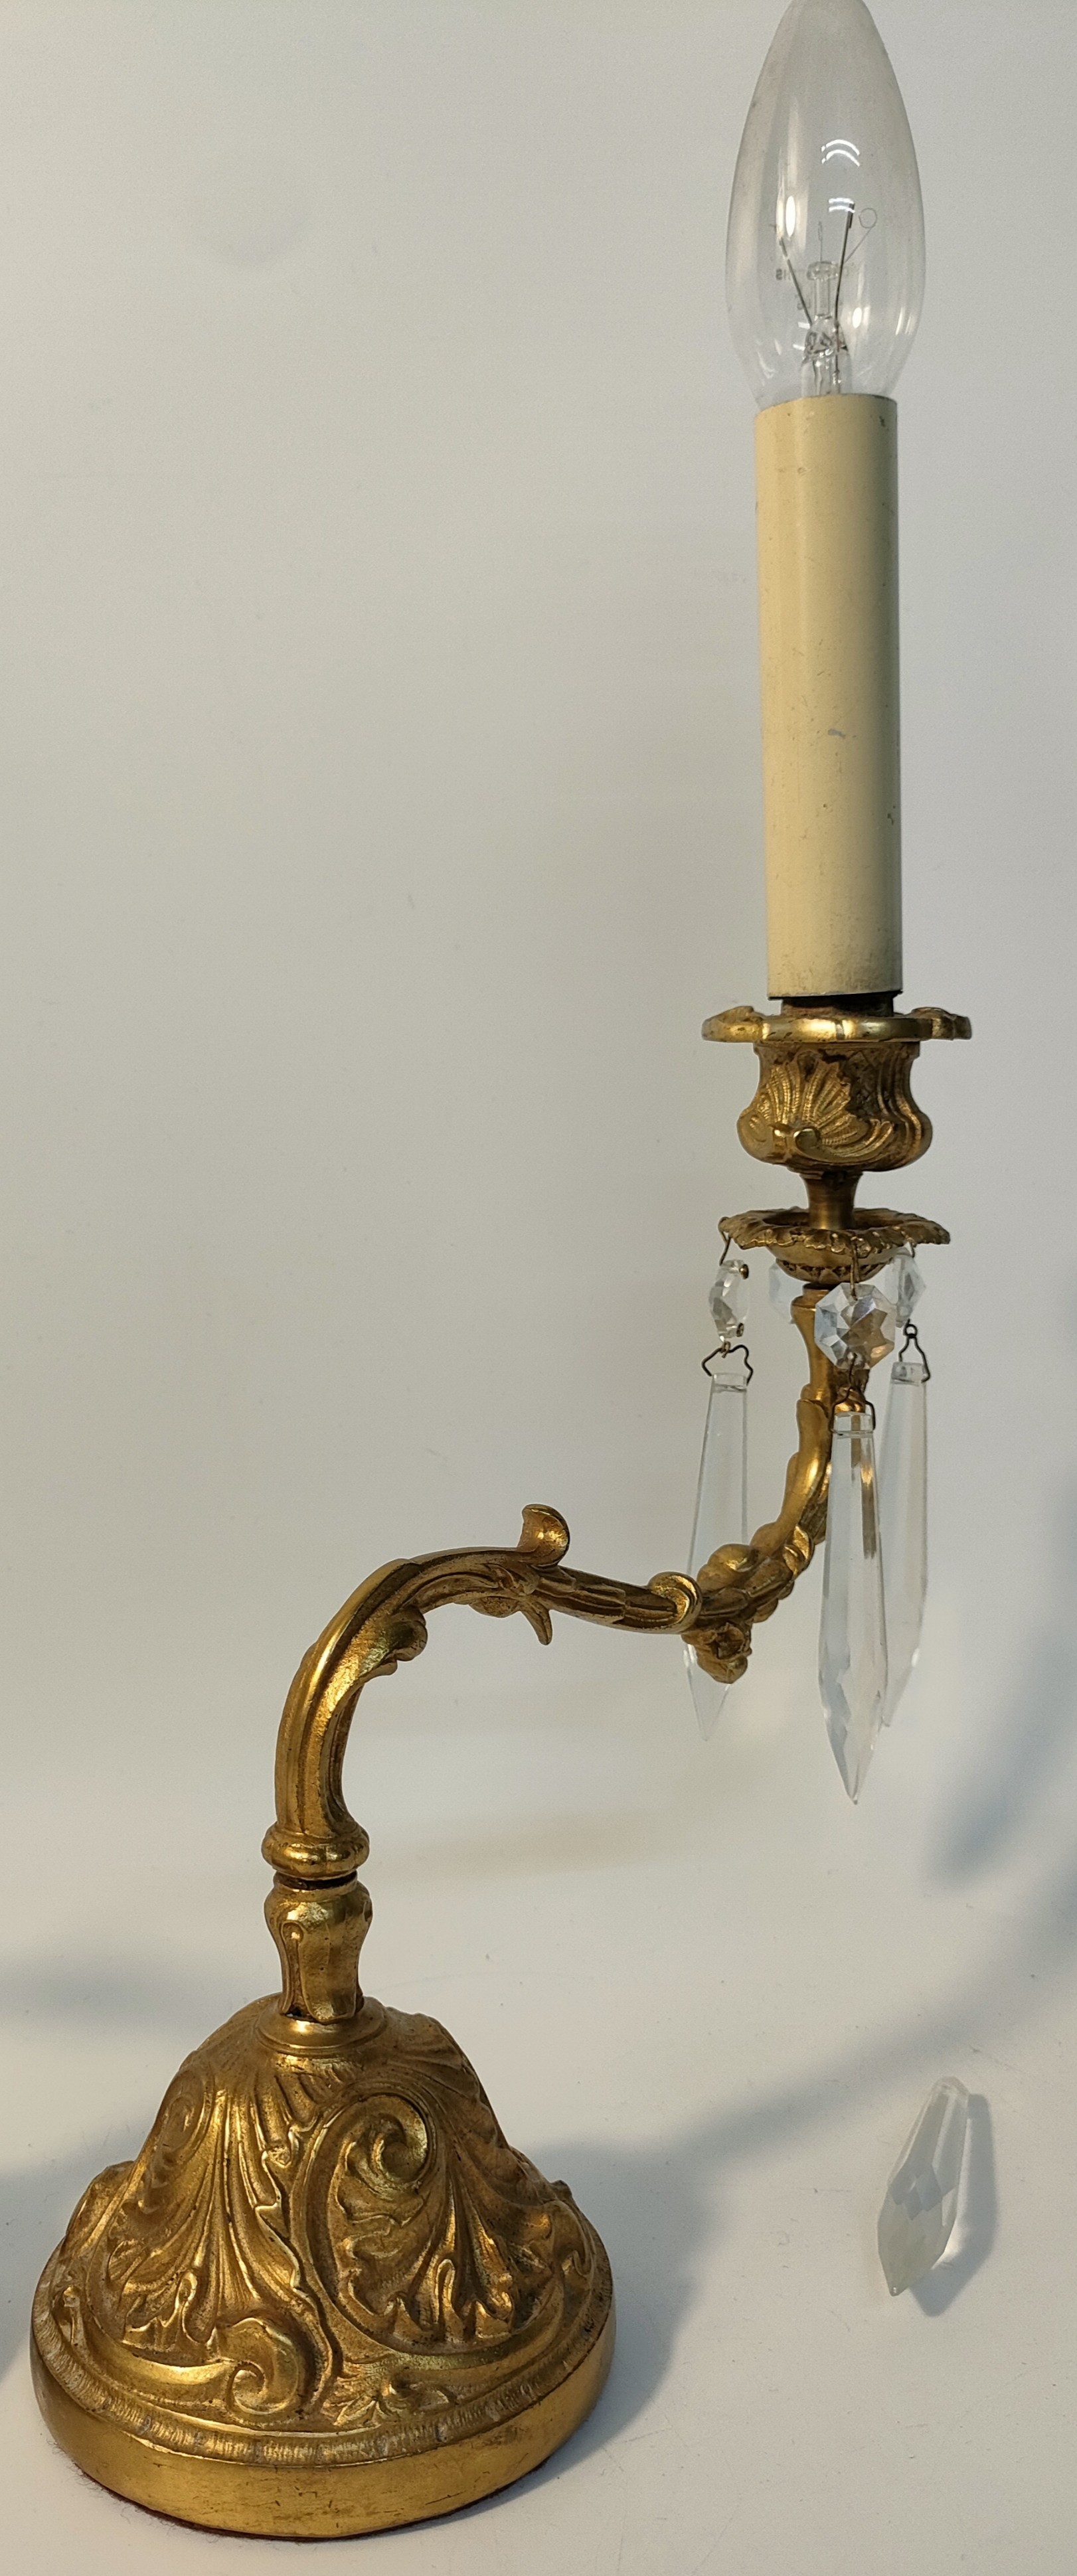 A Pair of 19th century heavy brass wall sconce's with crystal droplets [29cm] - Image 3 of 3